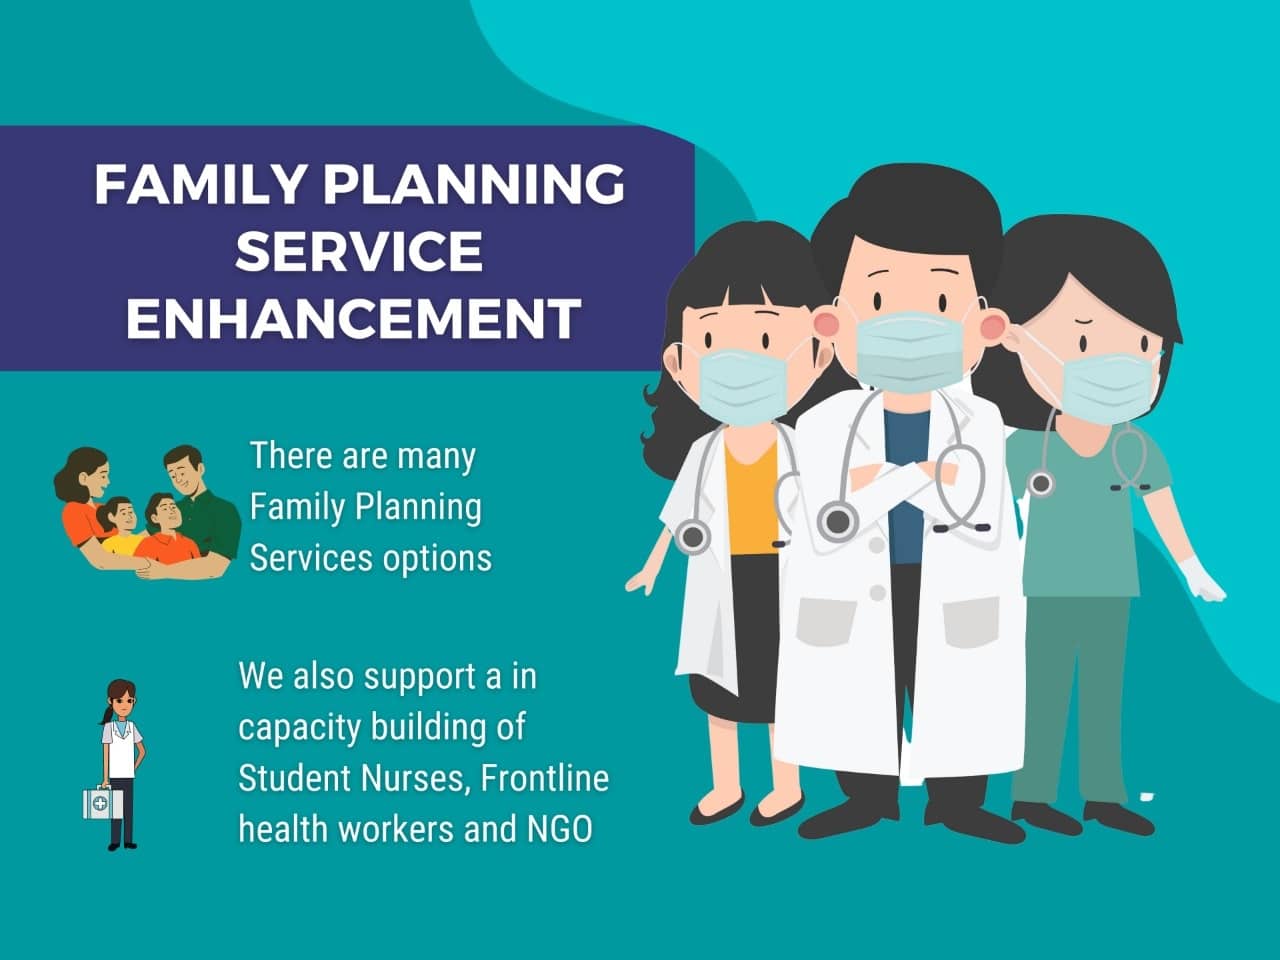 Strengthening the Pre-Service Family Planning Education in India